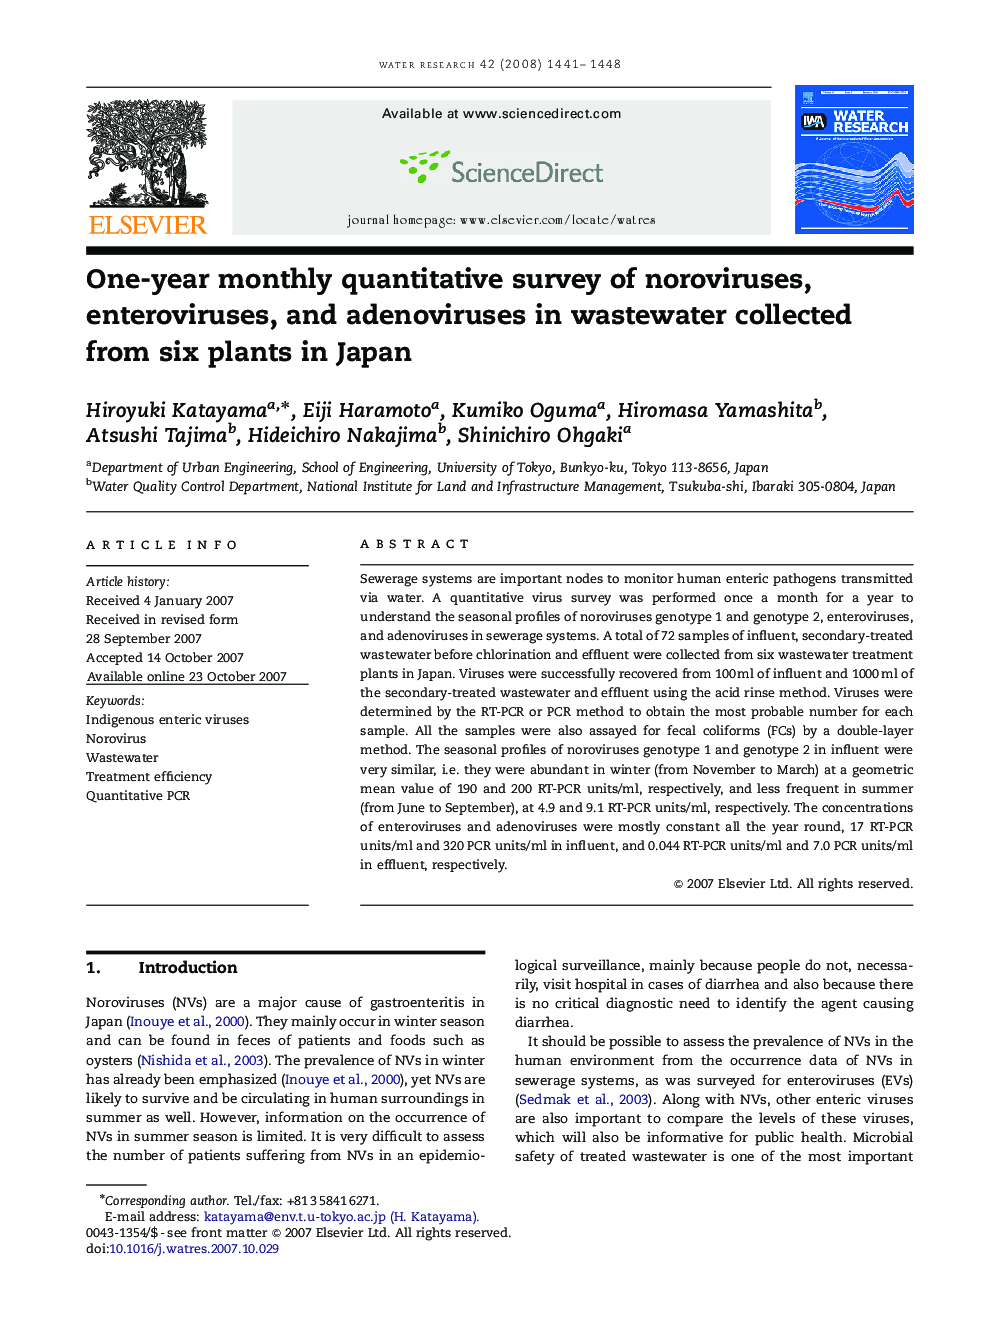 One-year monthly quantitative survey of noroviruses, enteroviruses, and adenoviruses in wastewater collected from six plants in Japan